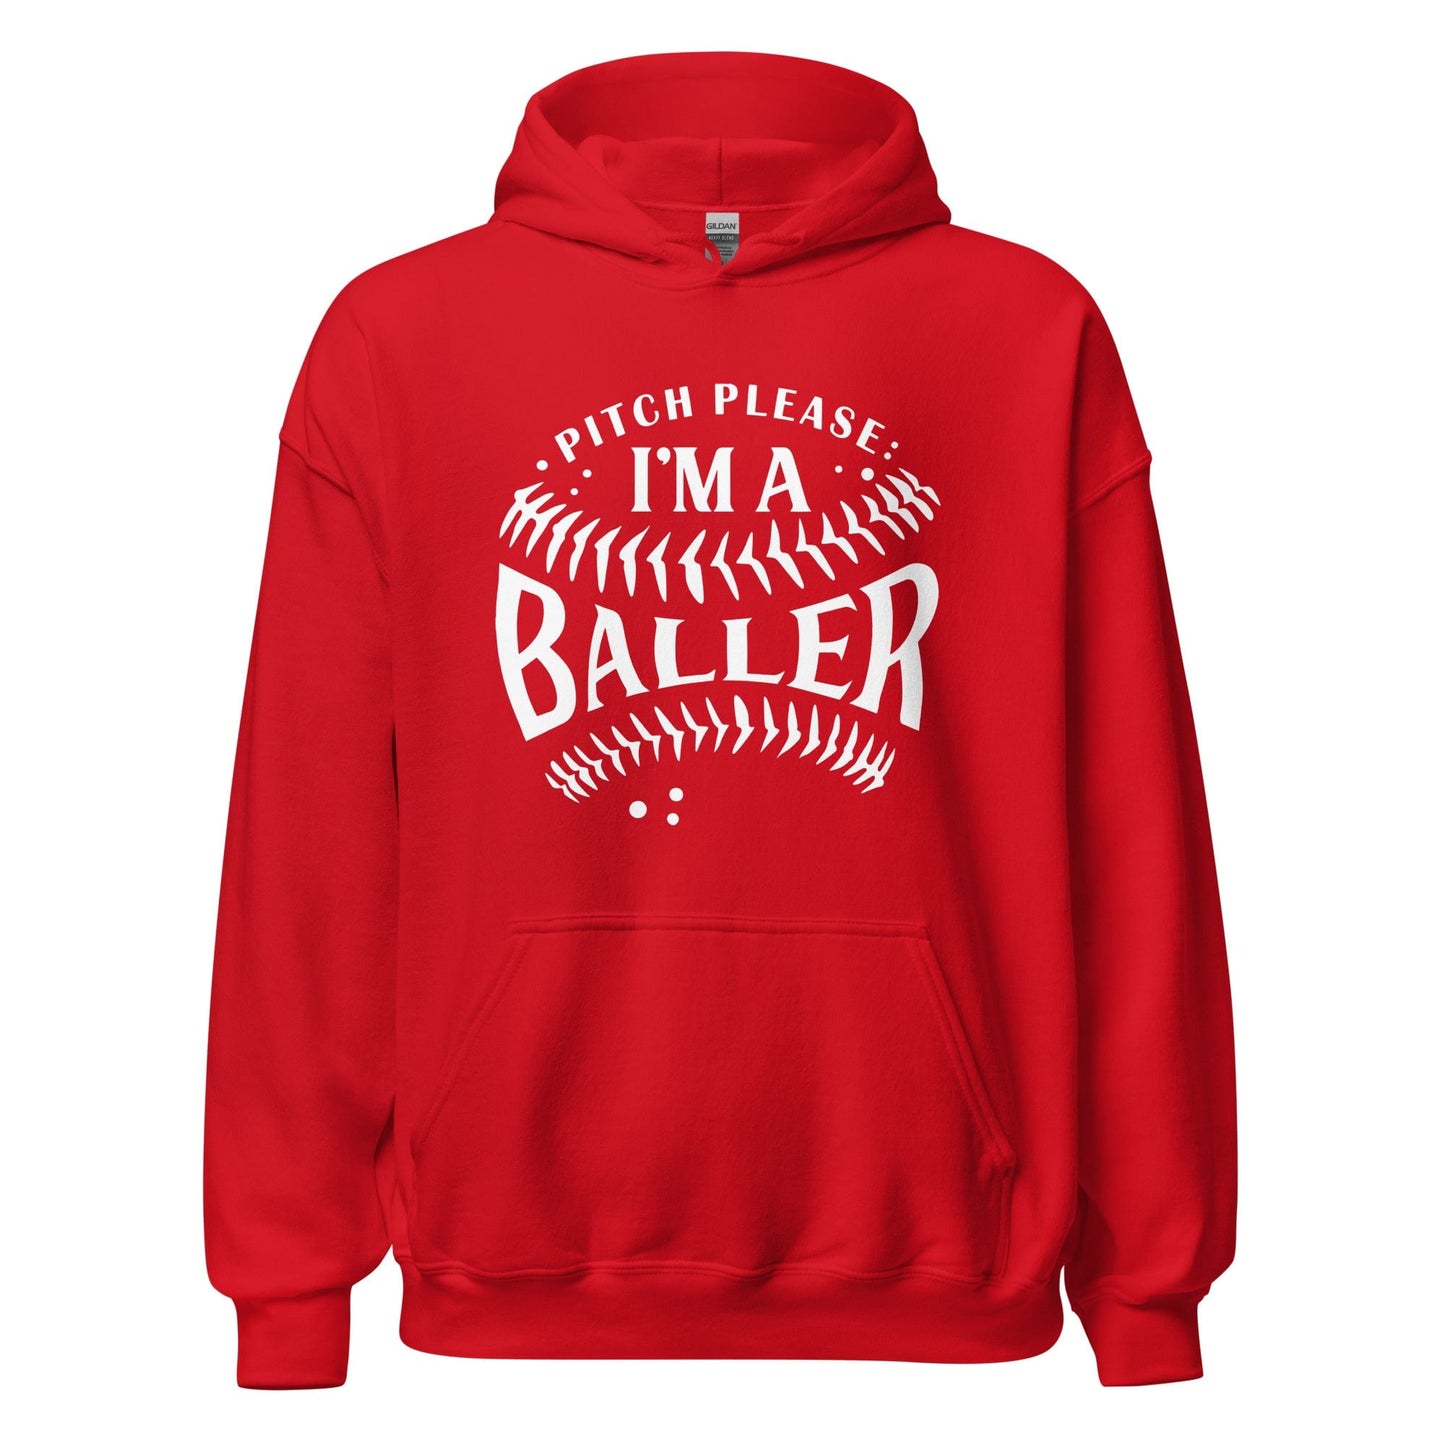 Pitch Please I'm A Baller - Adult Hoodie